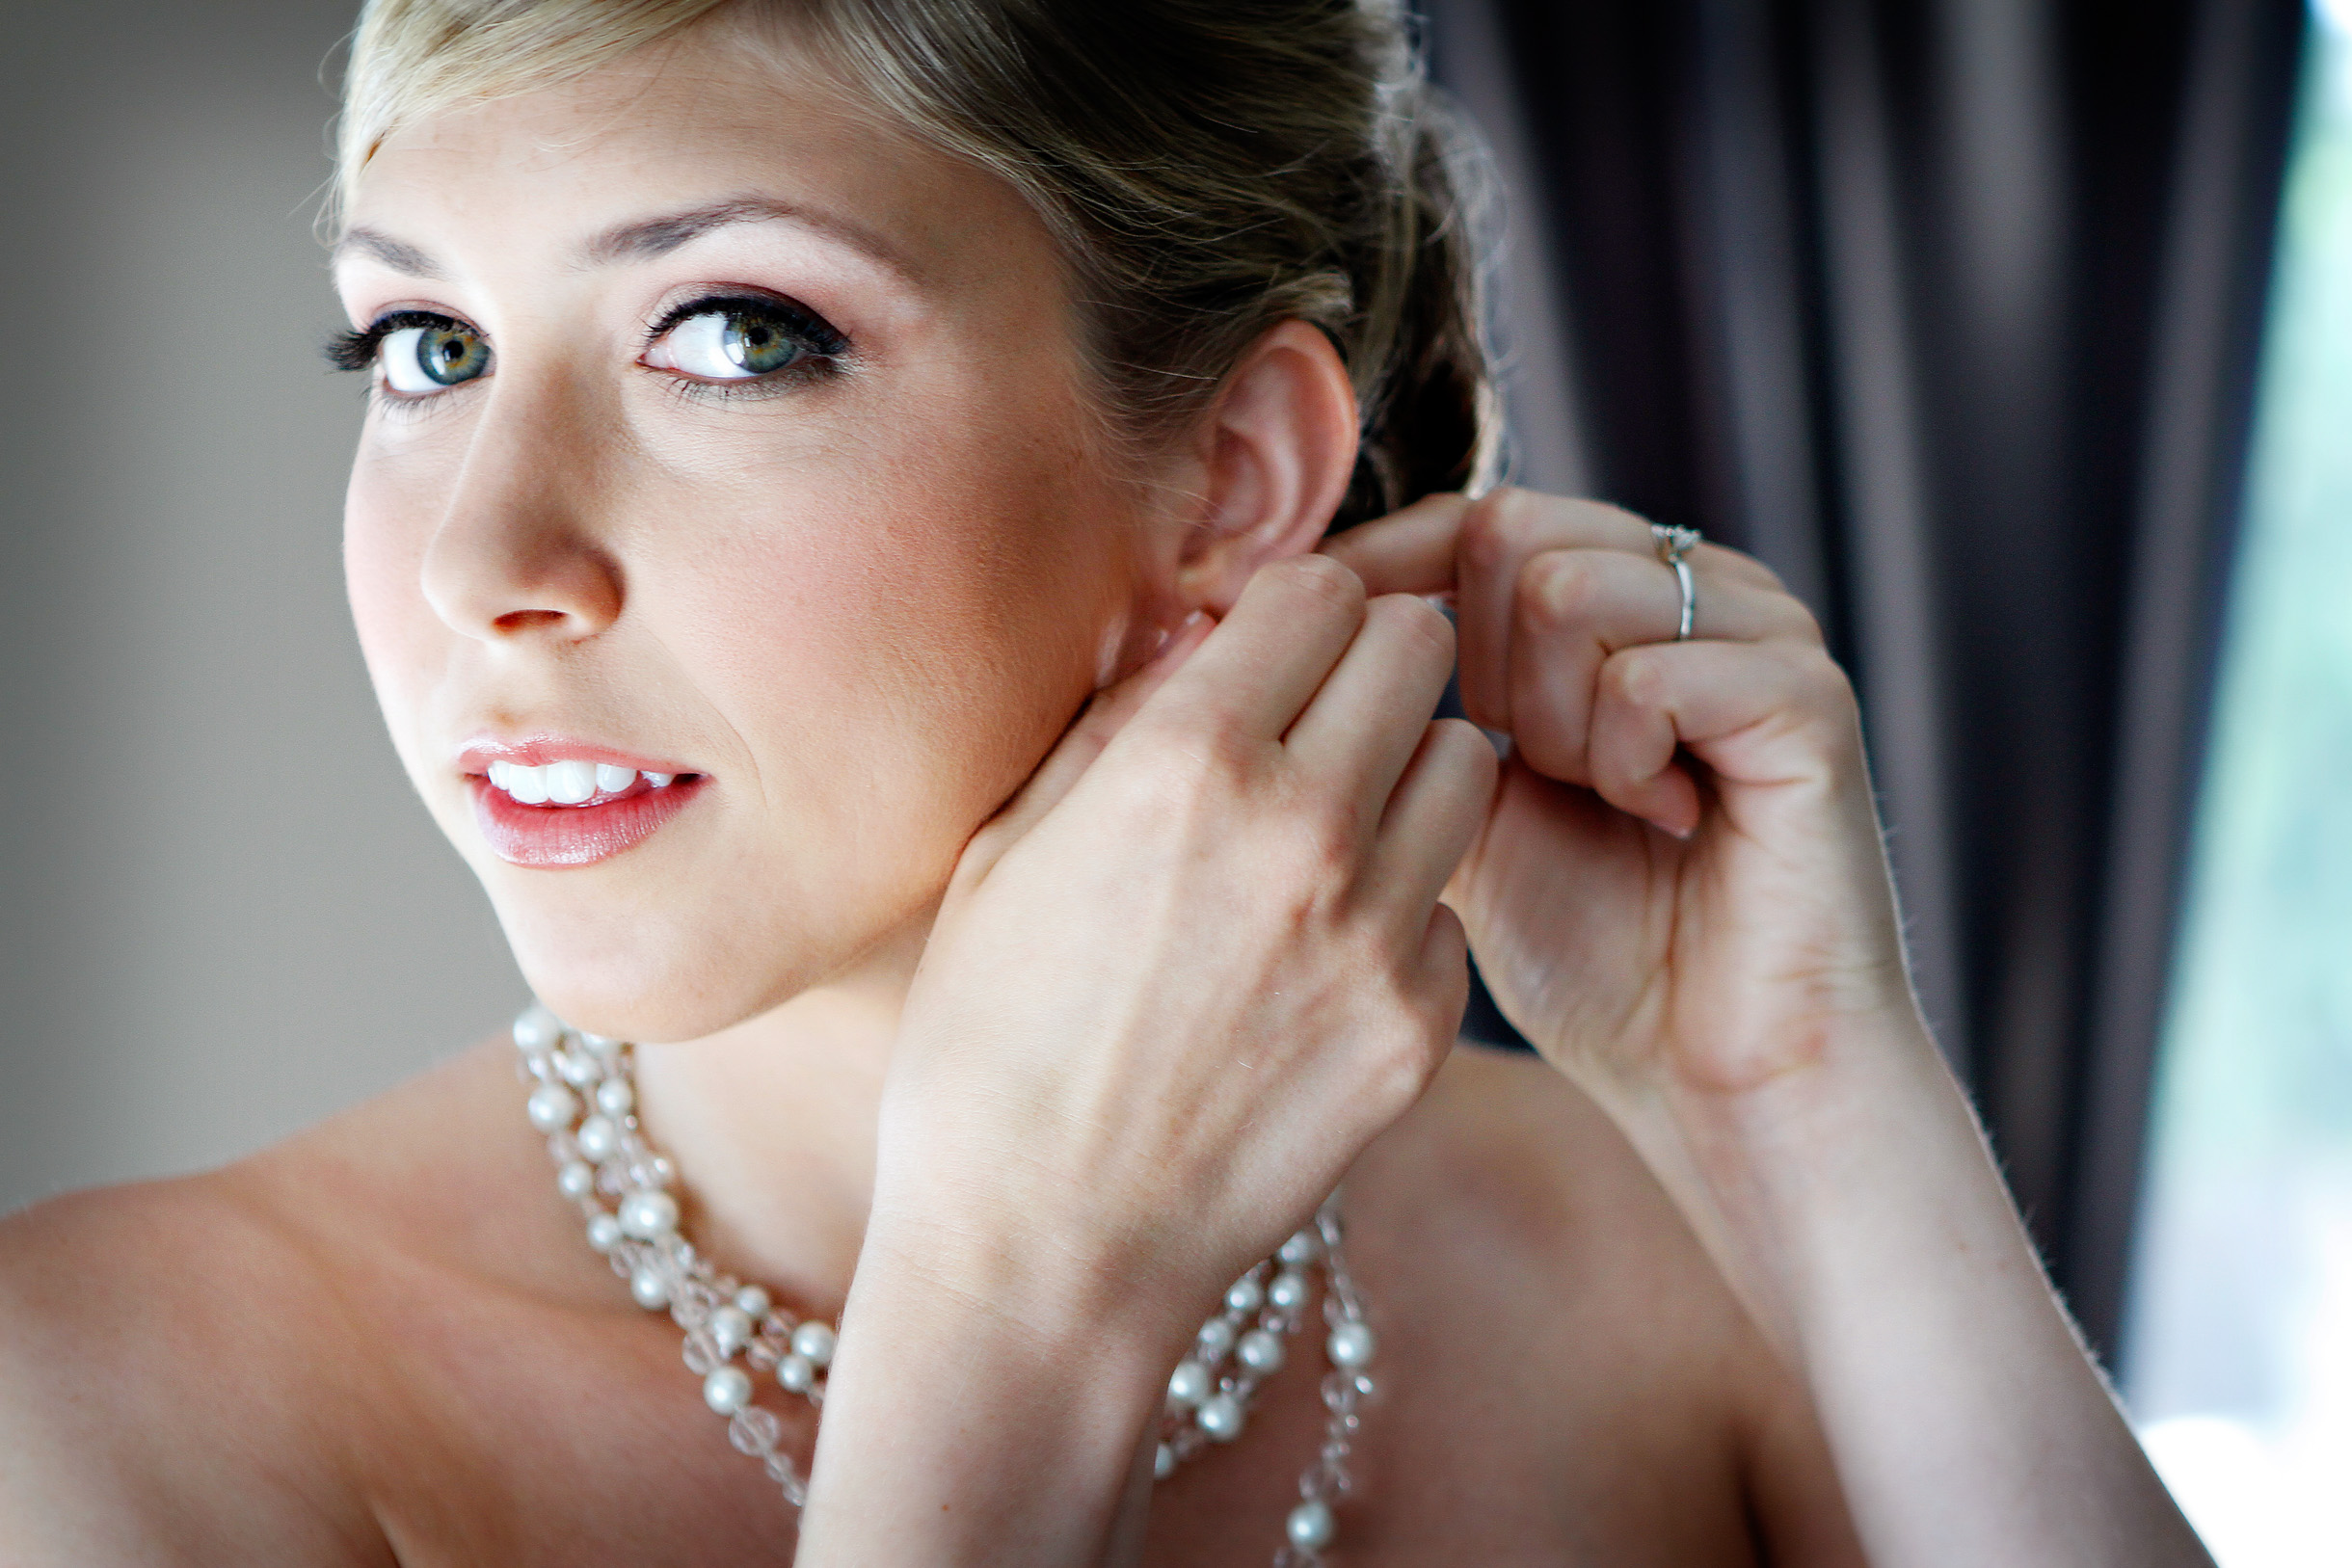 Bride putting on her earring